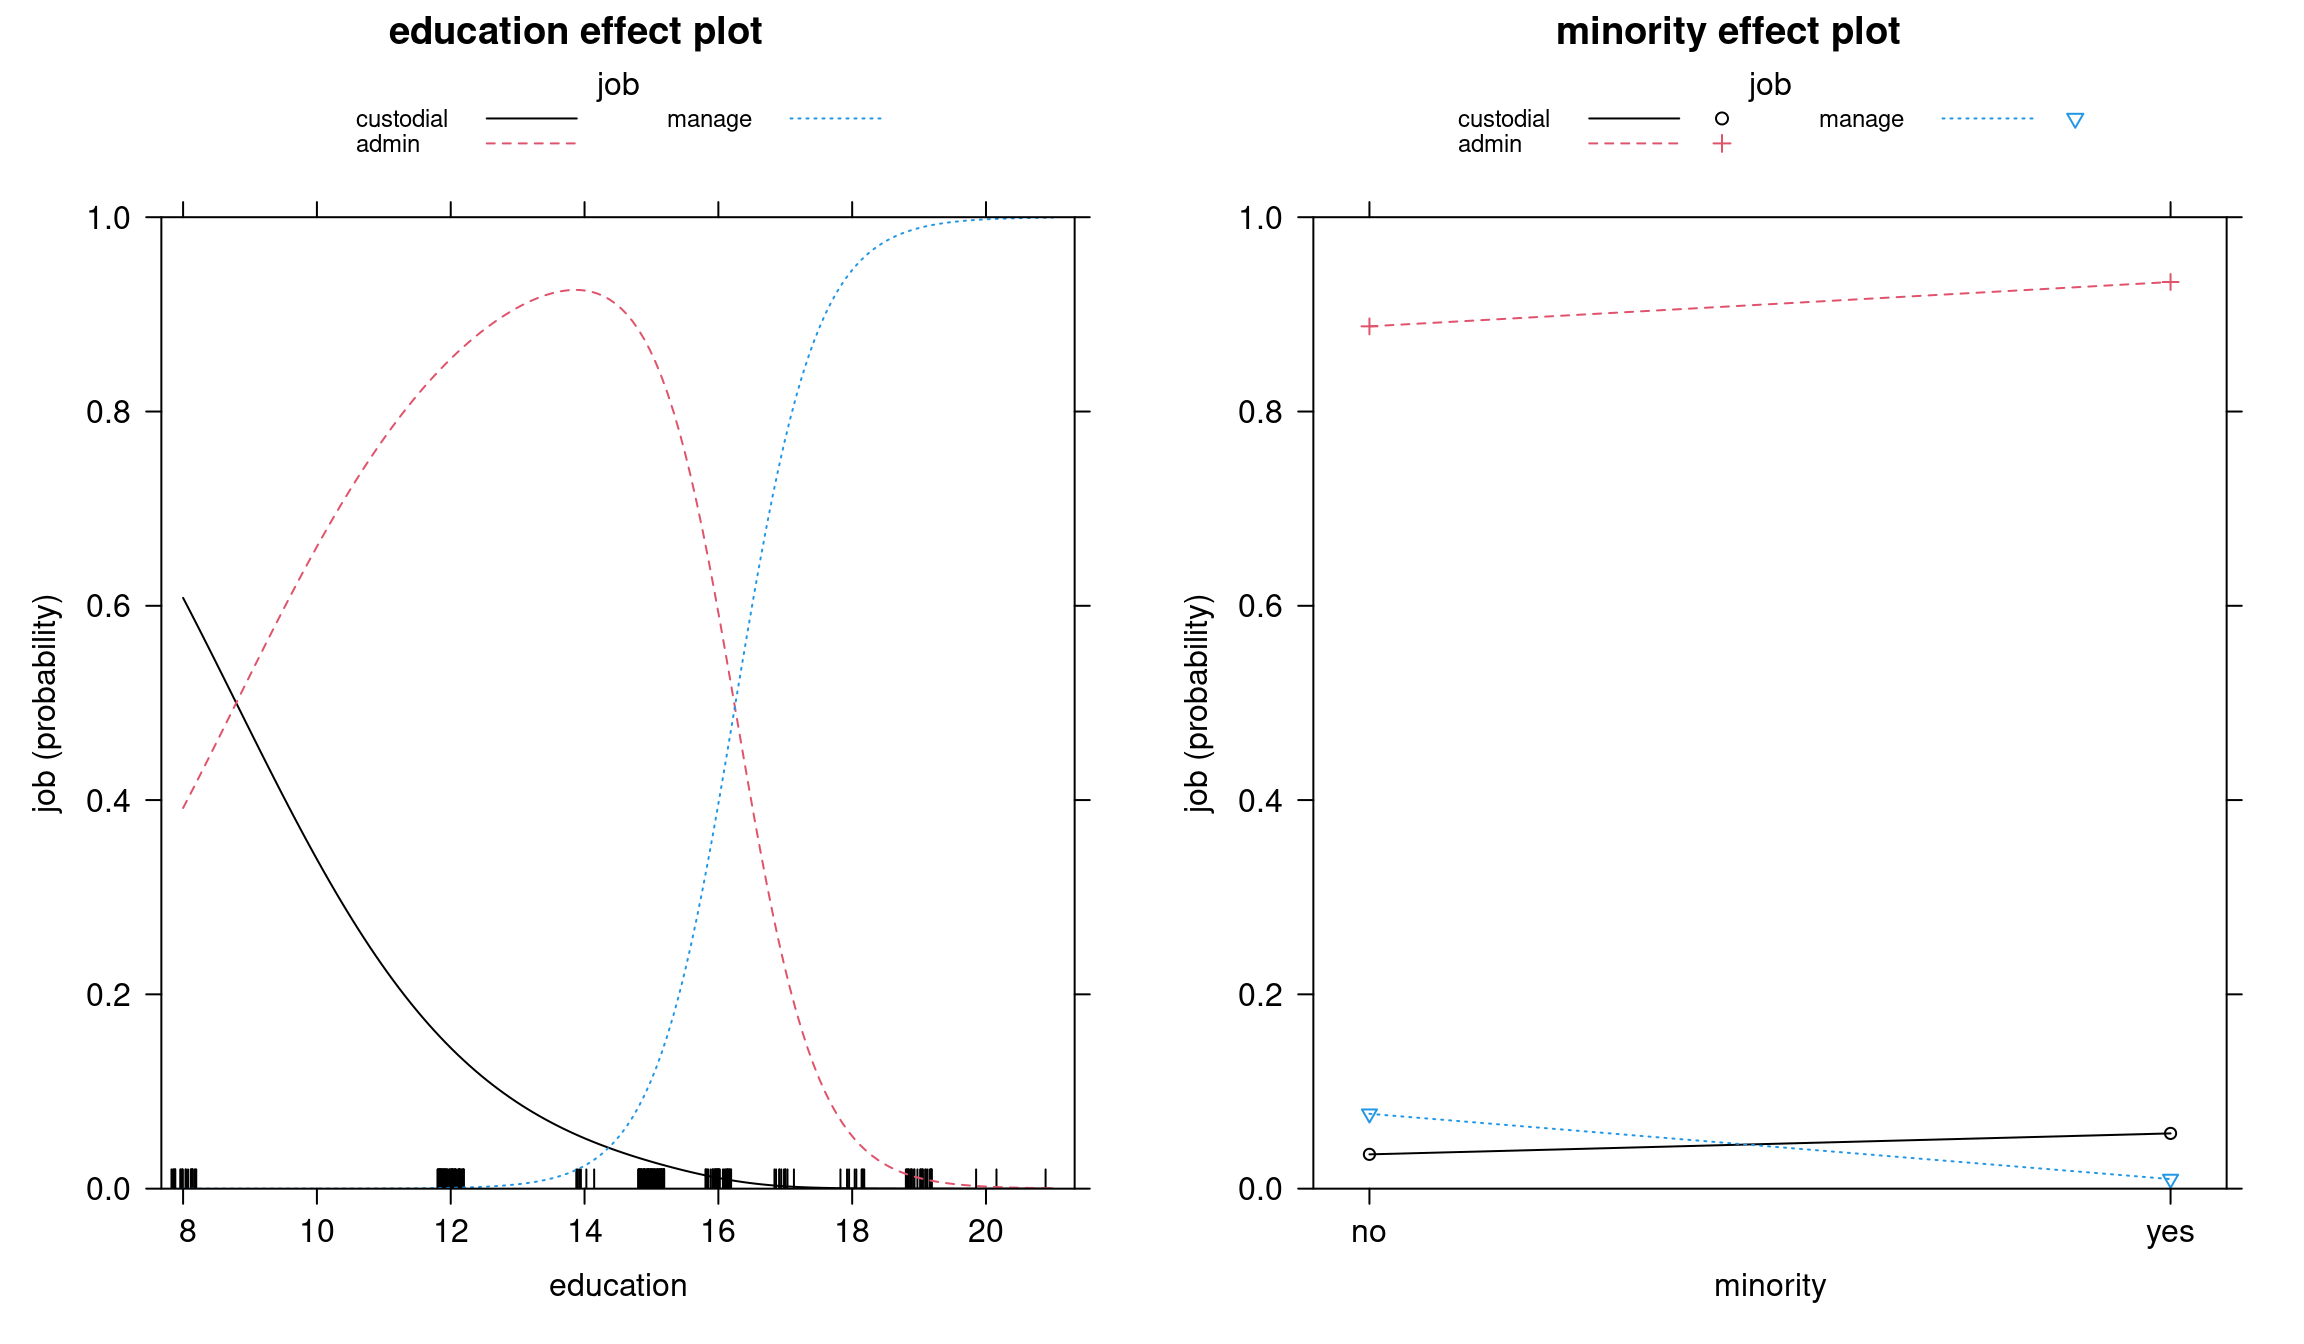 Education and minority effect plots - Multinomial model